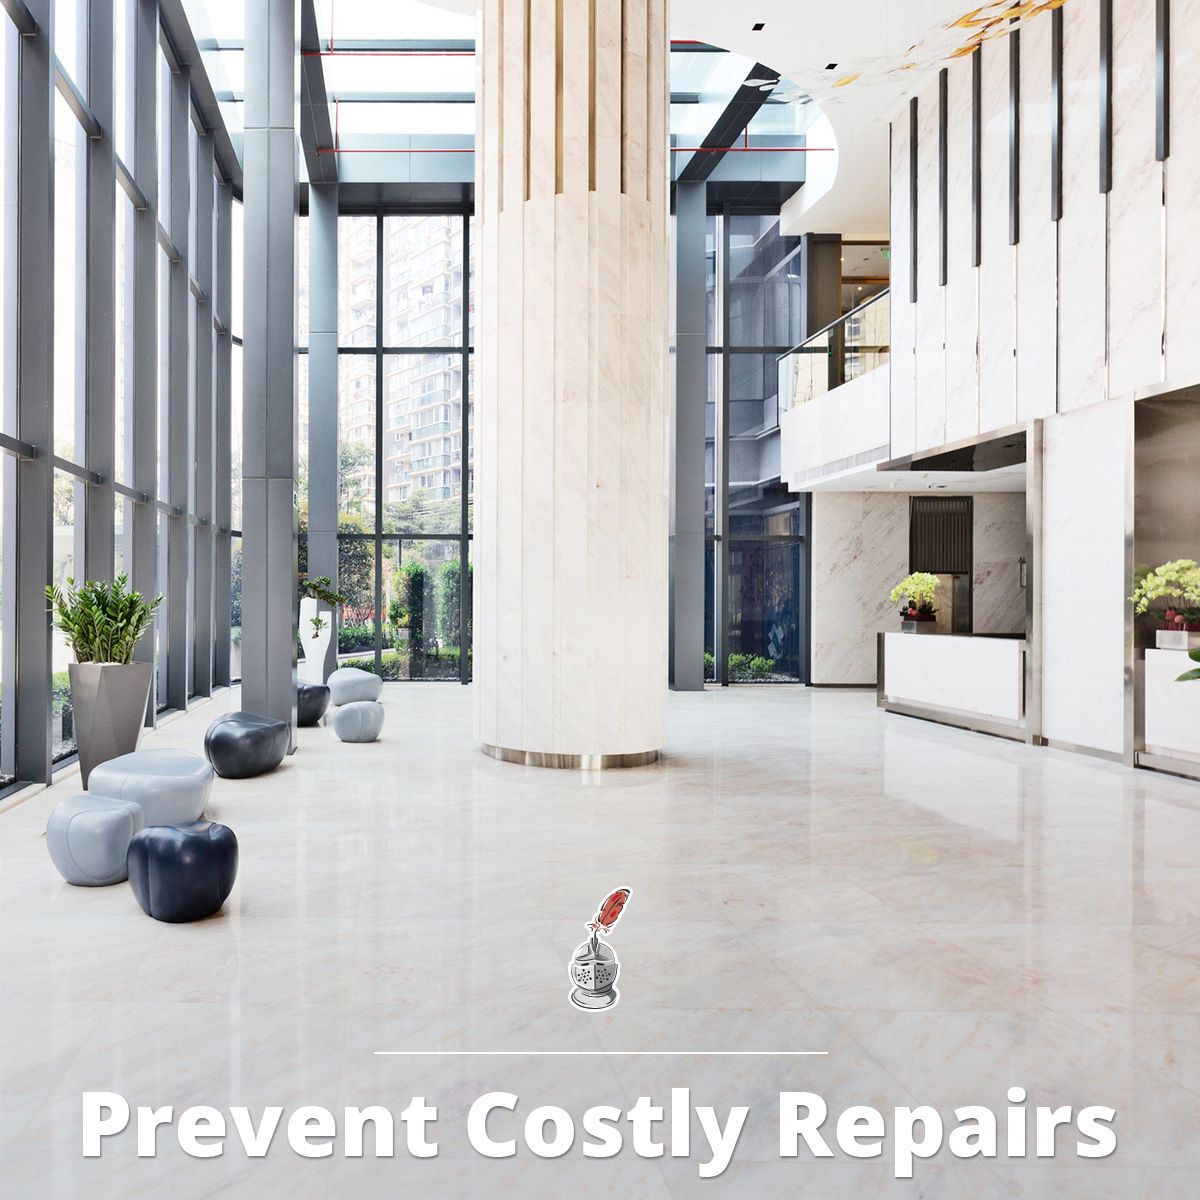 Prevent Costly Repairs